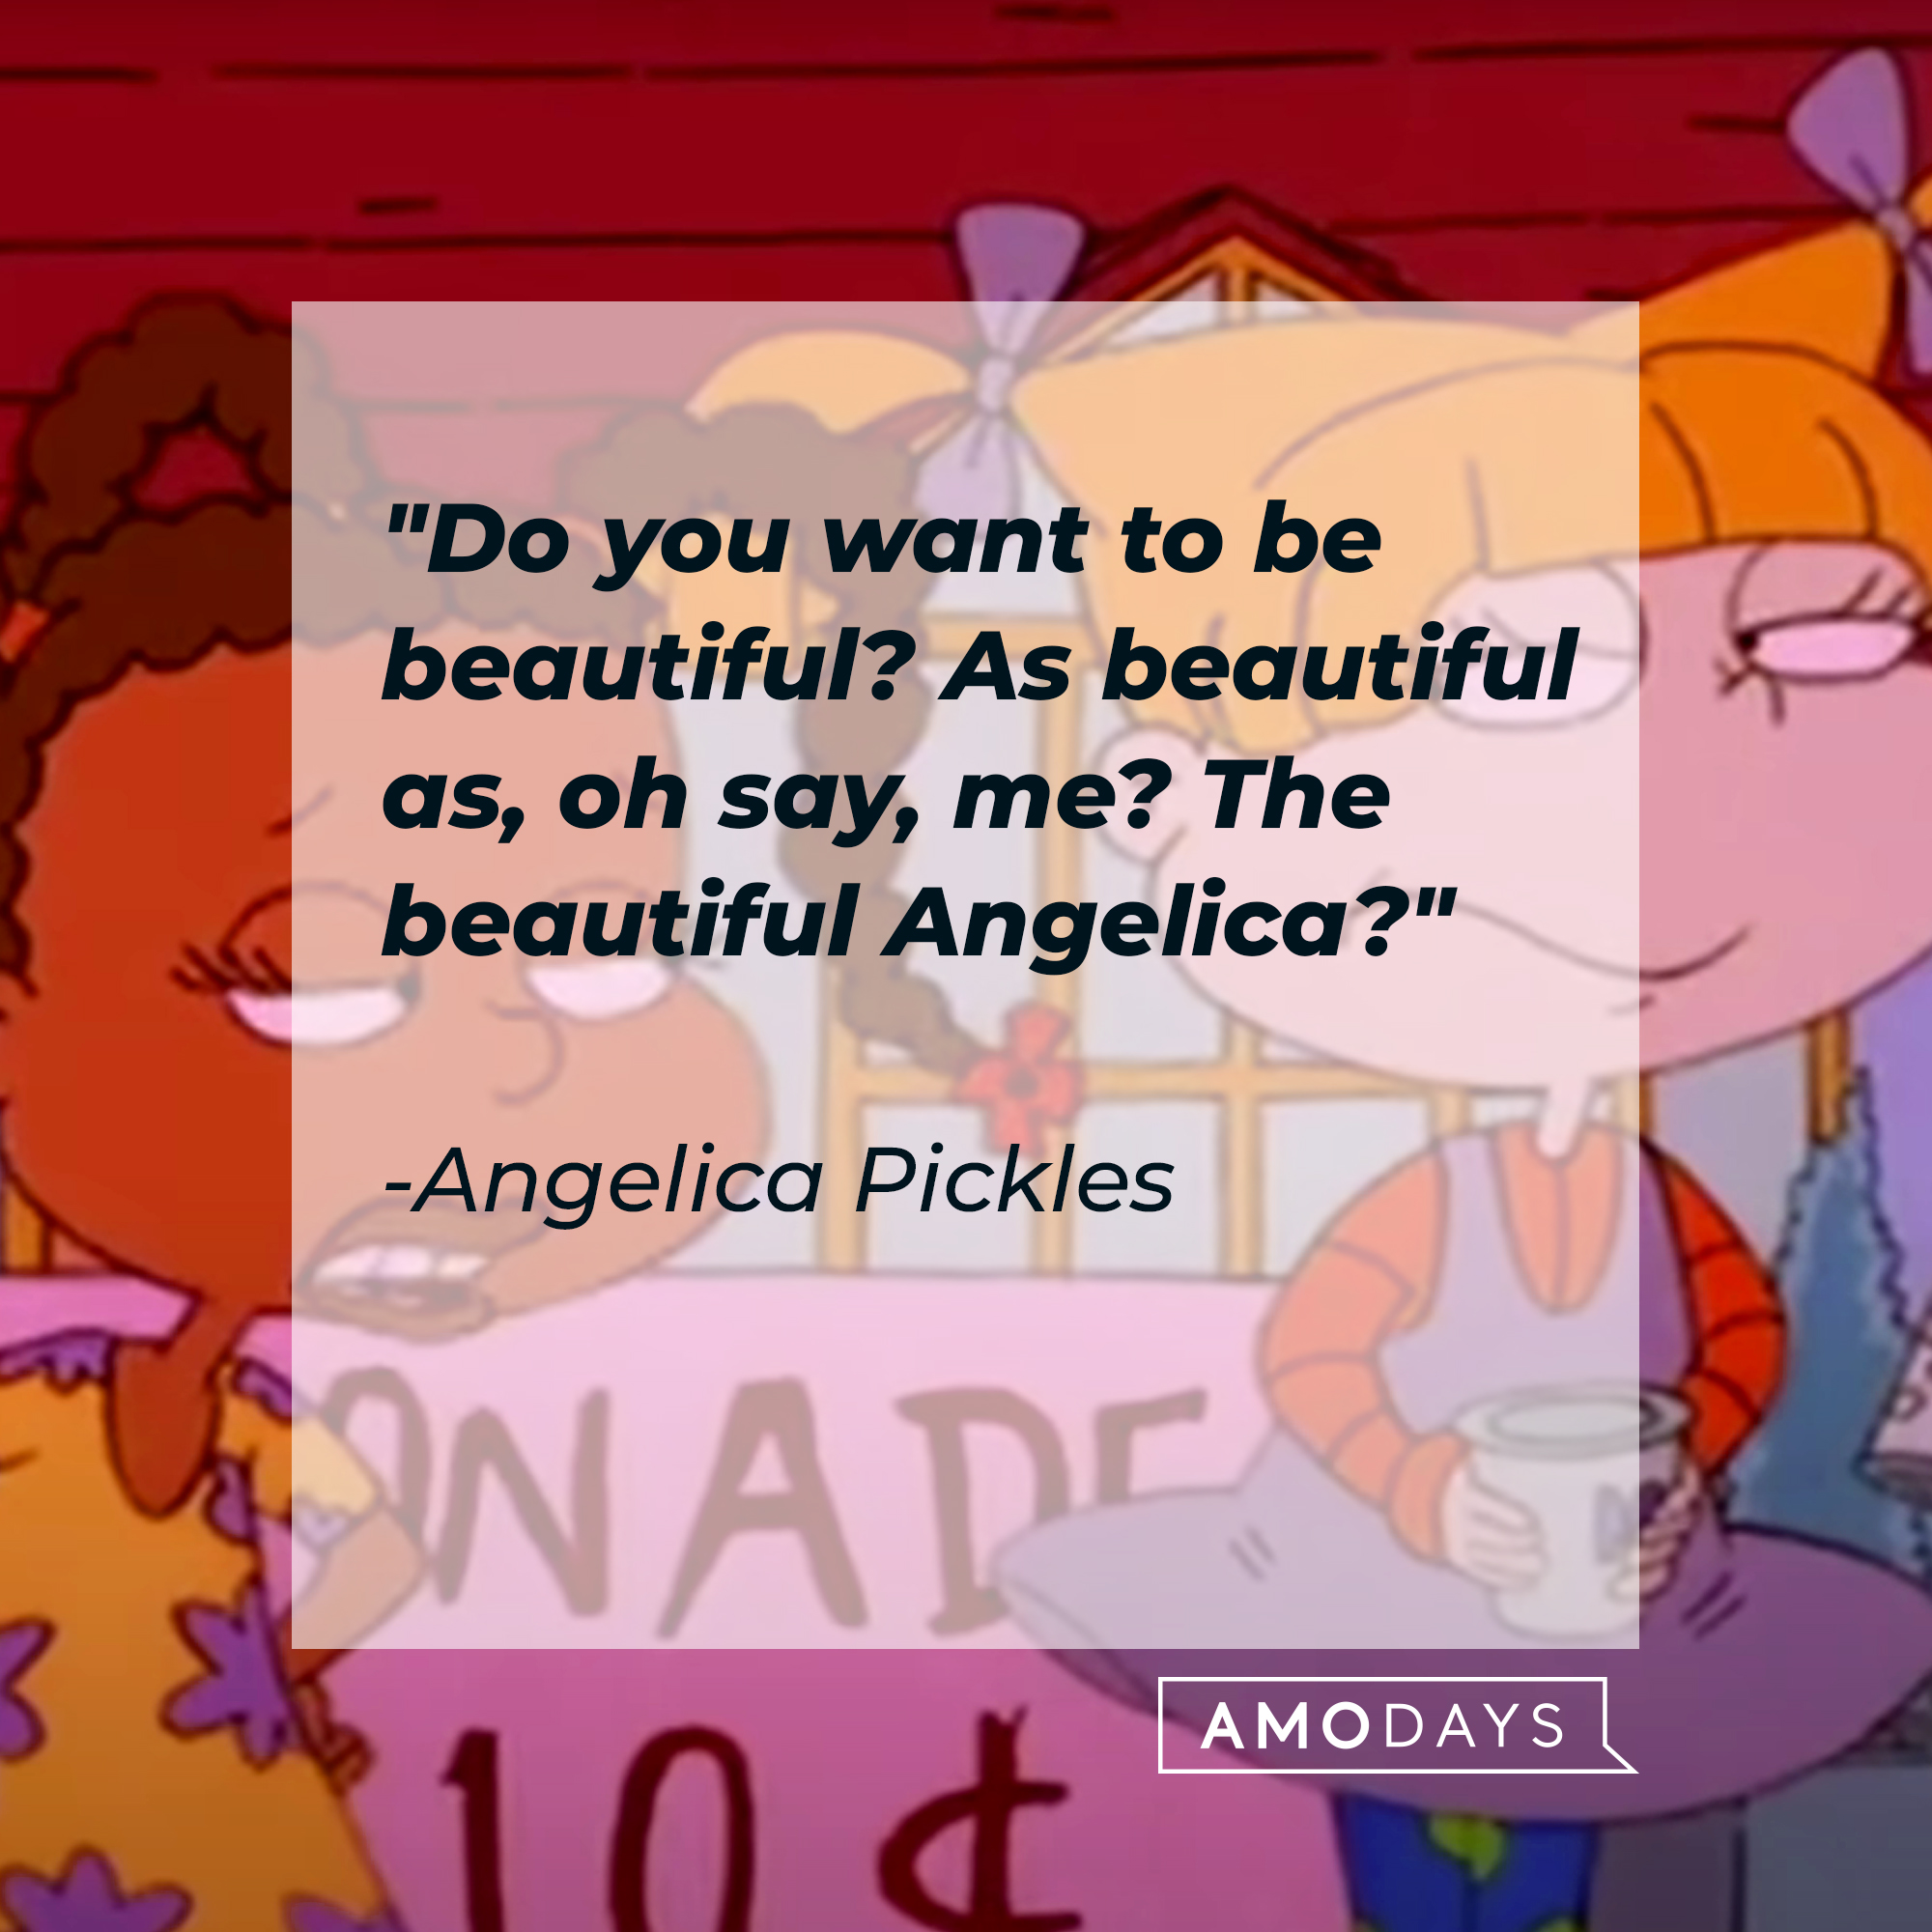 Angelica Pickles’ quote: "Do you want to be beautiful? As beautiful as, oh say, me? The beautiful Angelica?" | Source: Facebook/Rugrats